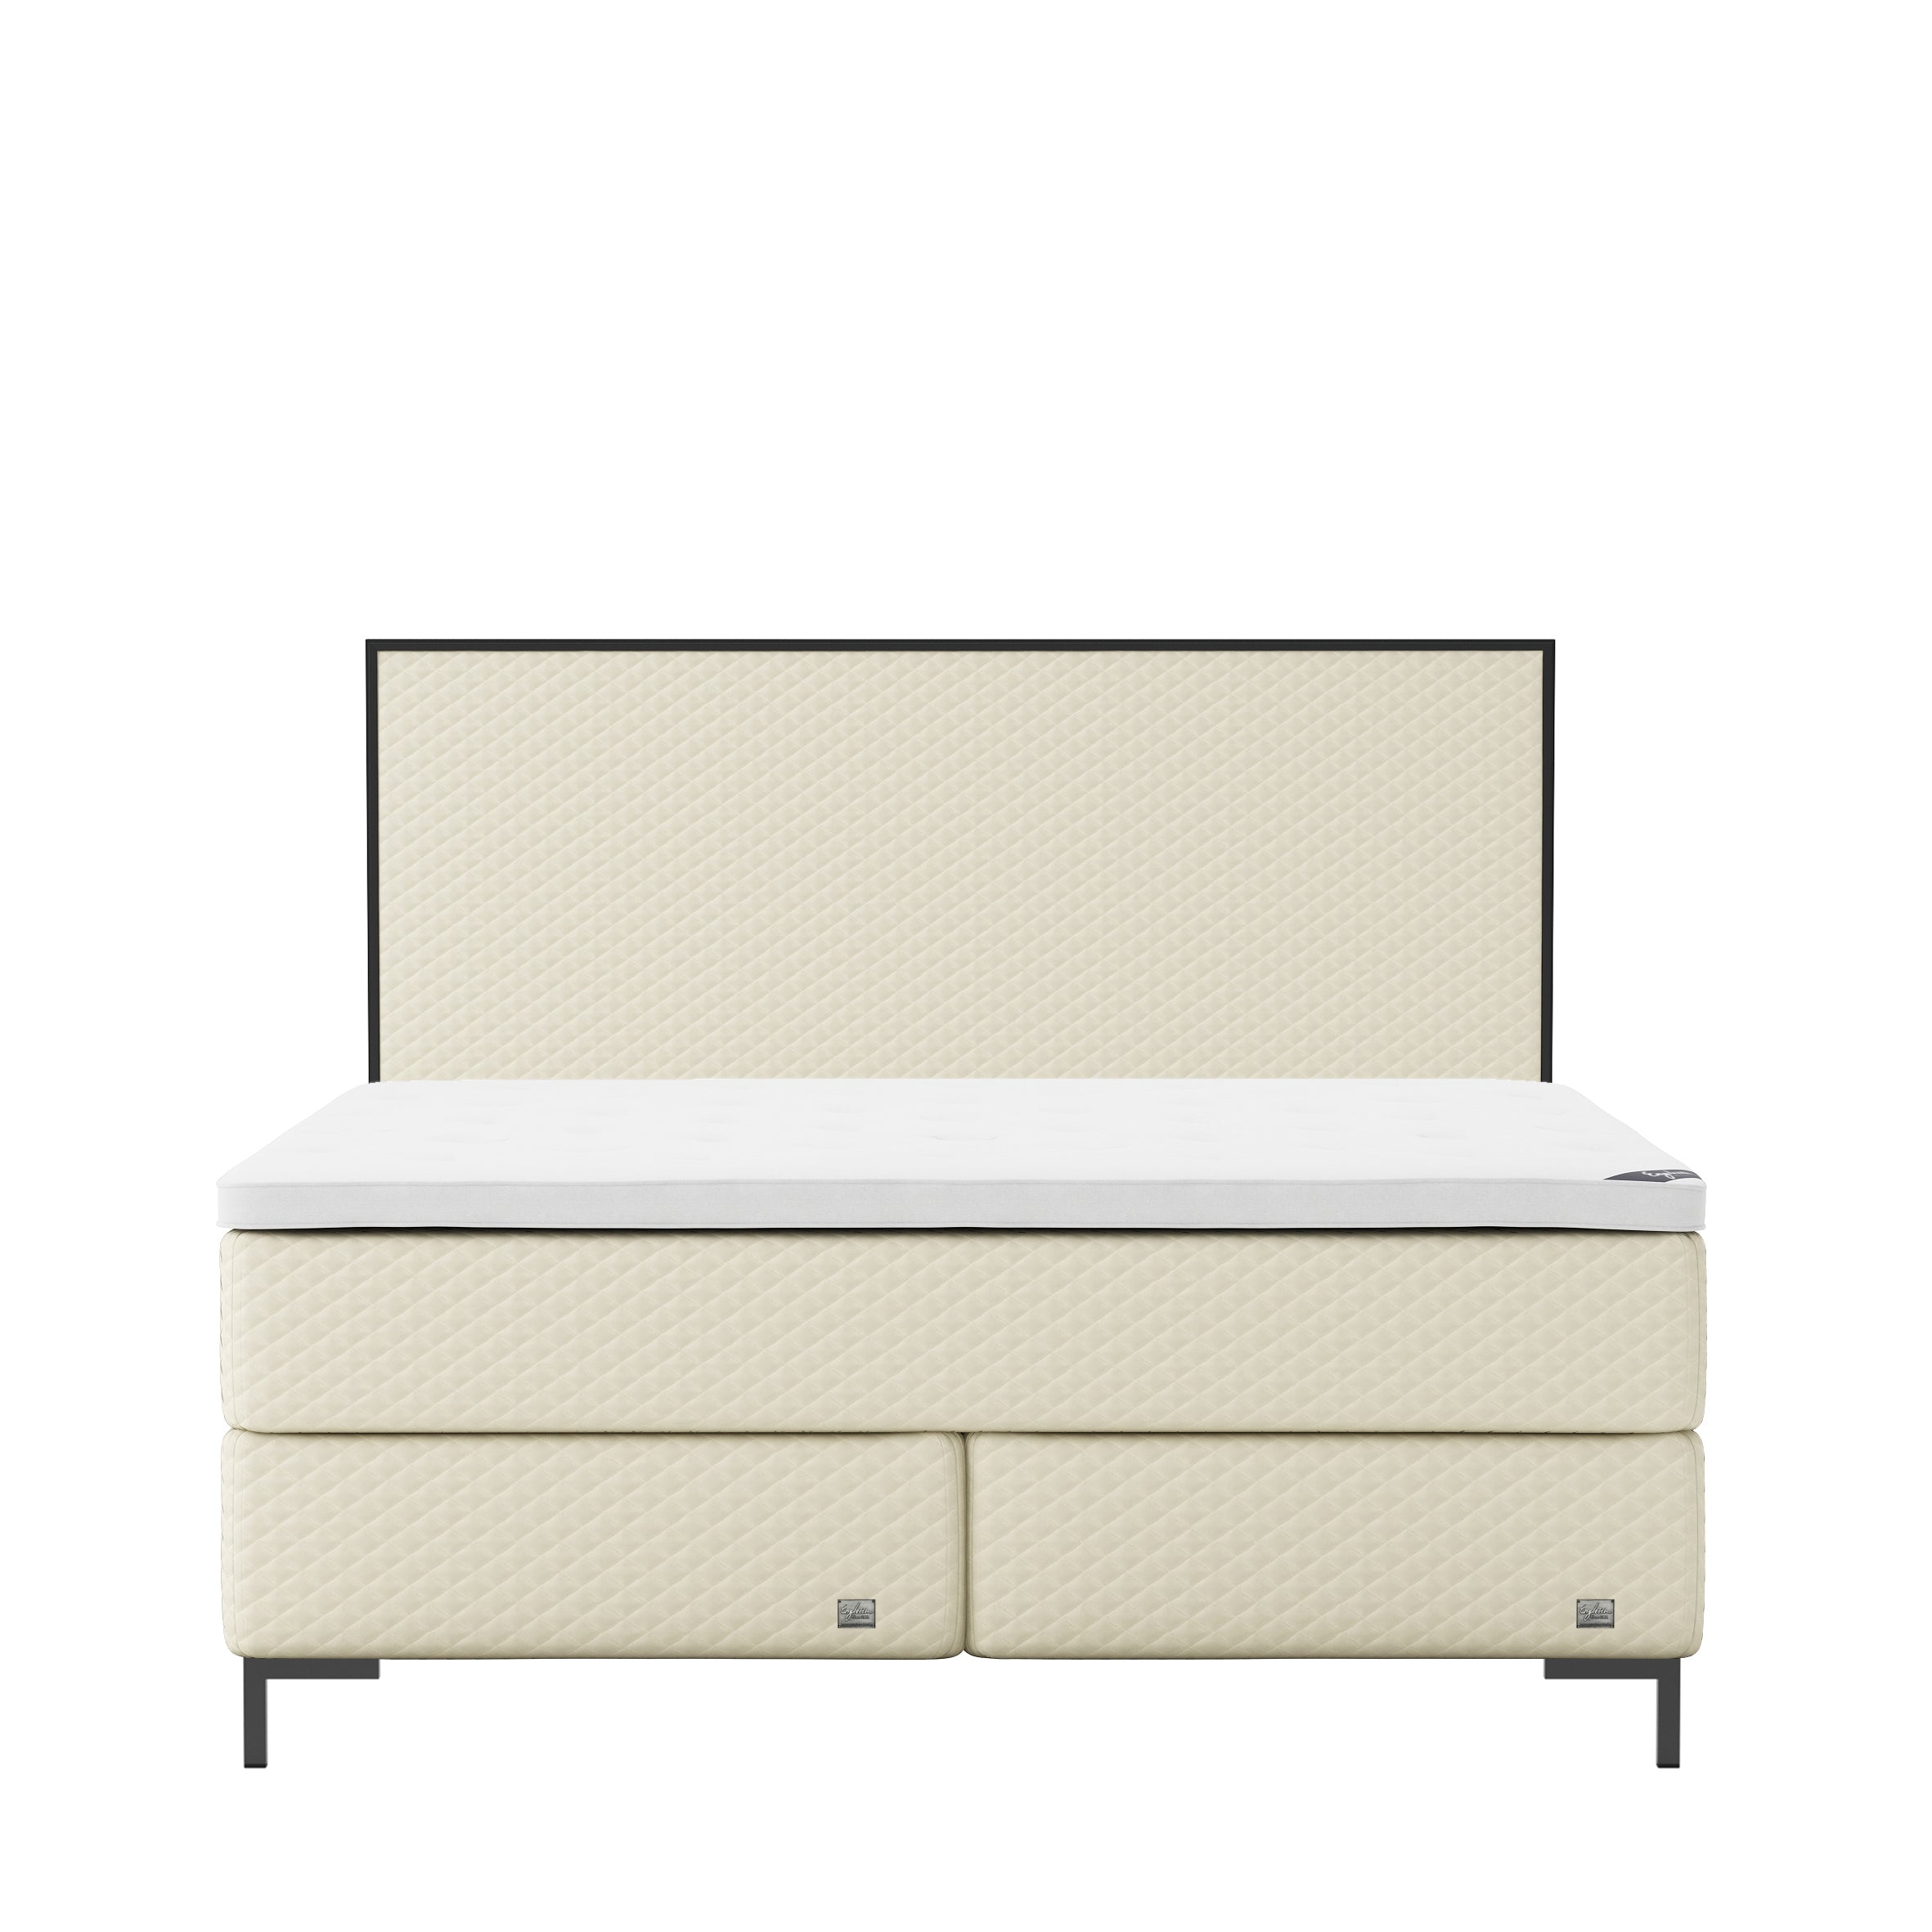 Englesson Beds Pearl / 160 x 200 Superior Kontinental High Frame SC160MF20 #Färg_Pearl #Colour_Pearl